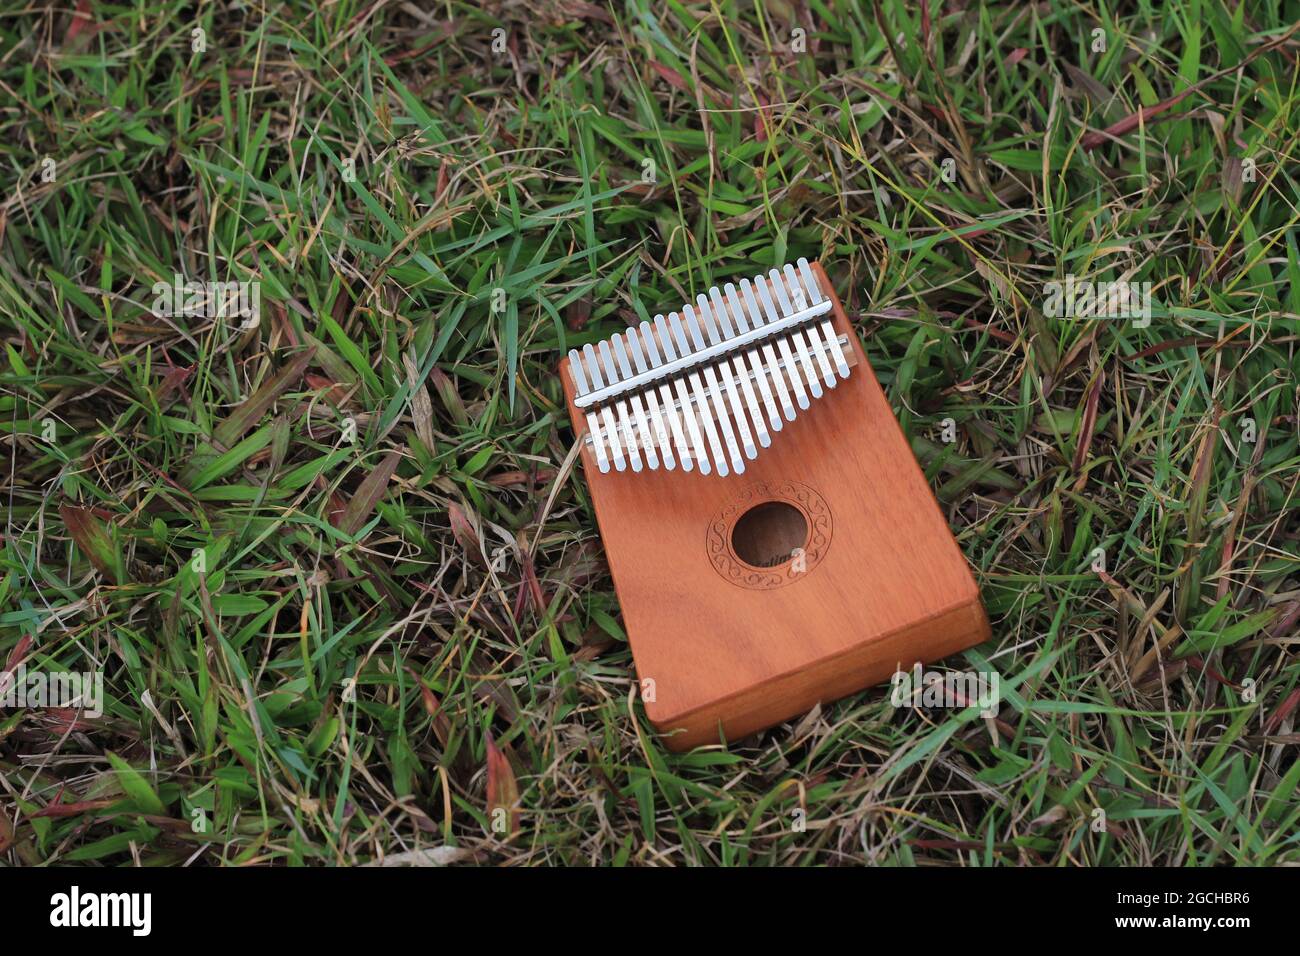 Kalimba, acoustic music instrument from africa and its soft cover at Grass Stock Photo